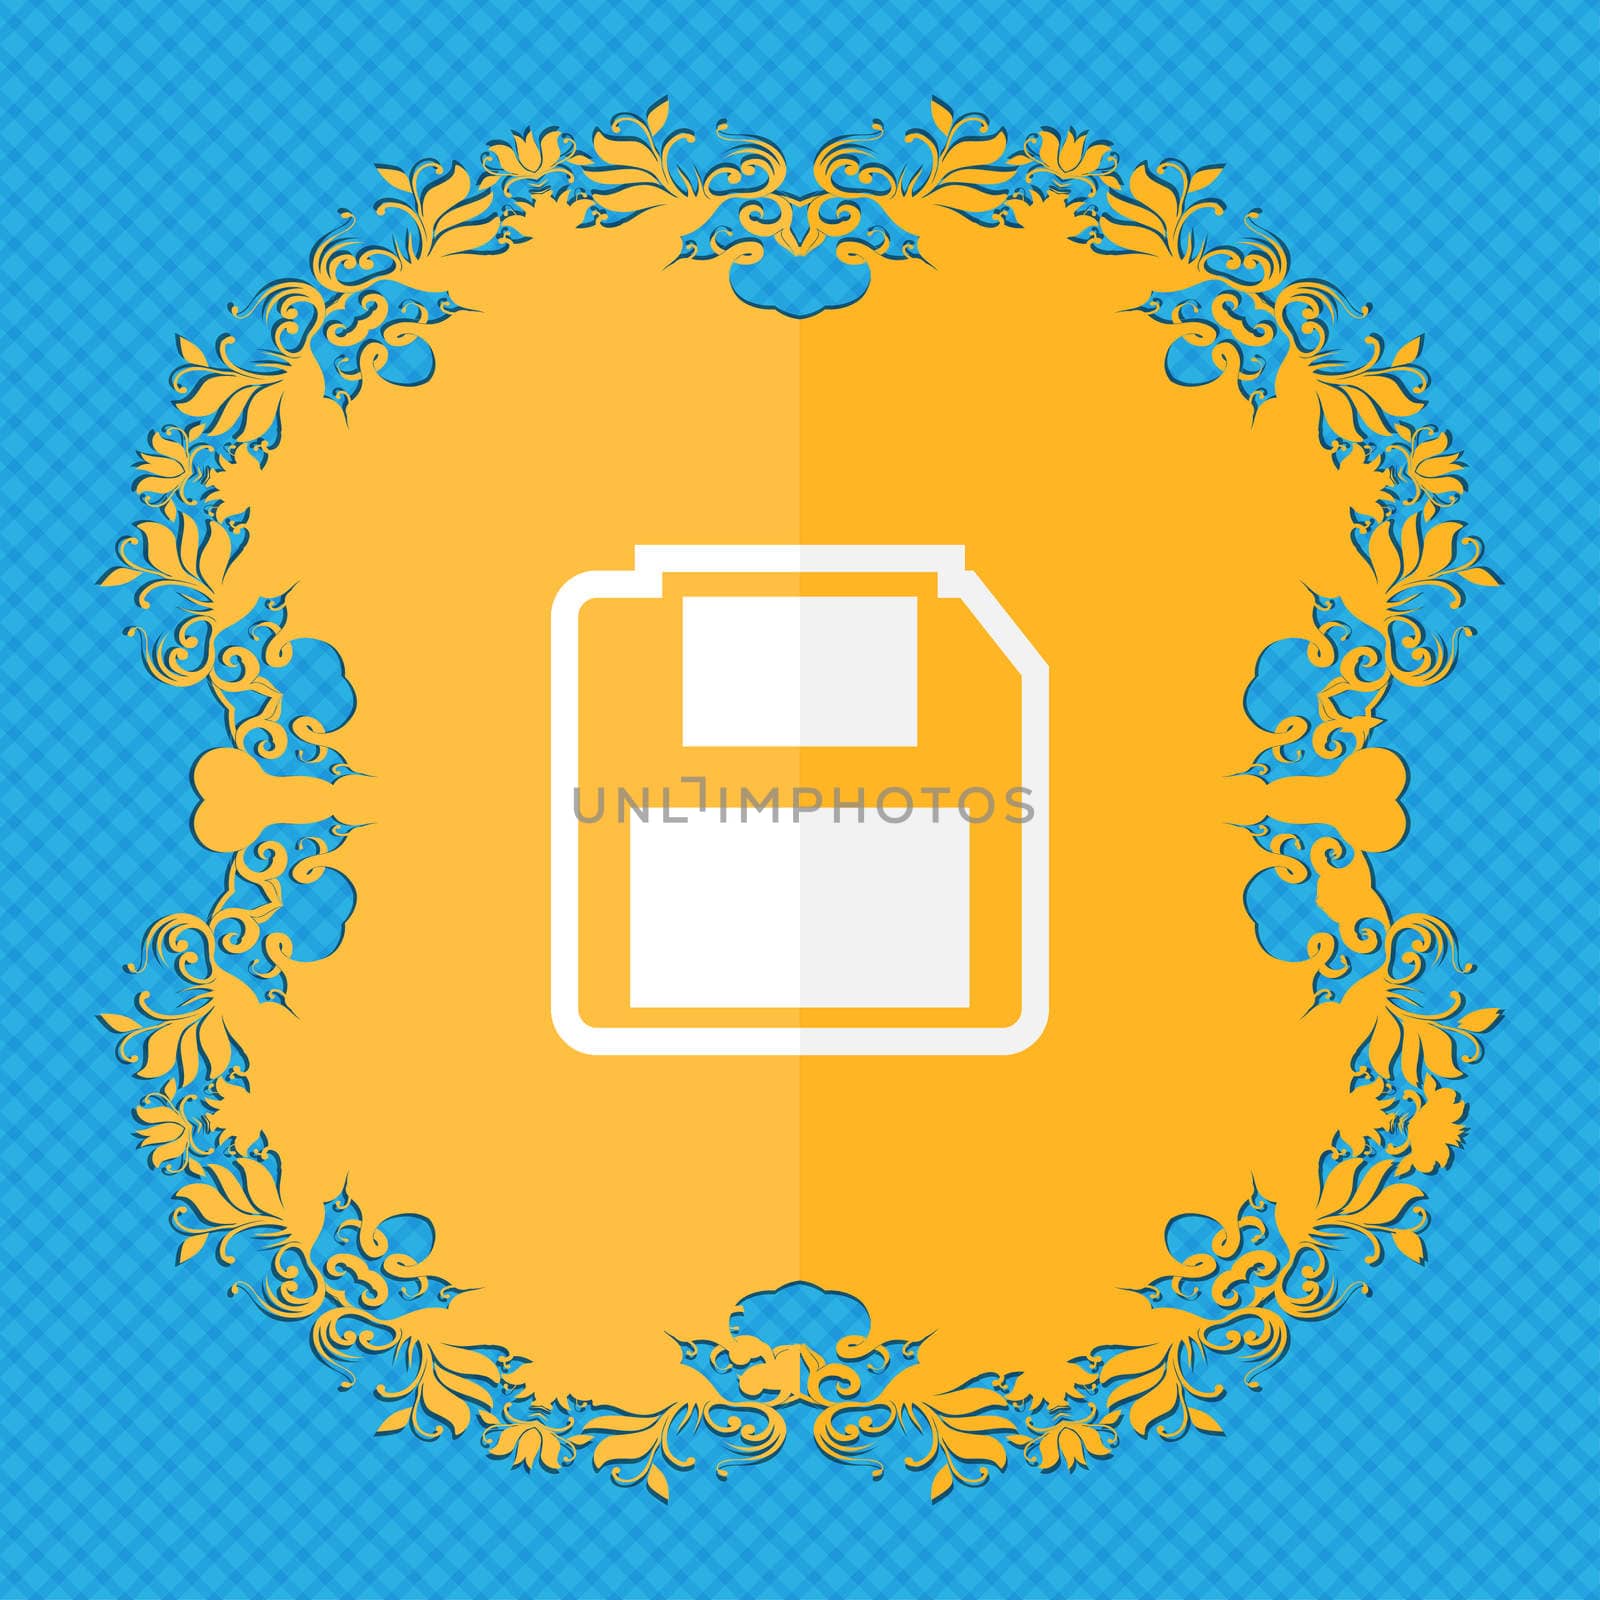 floppy disk. Floral flat design on a blue abstract background with place for your text.  by serhii_lohvyniuk